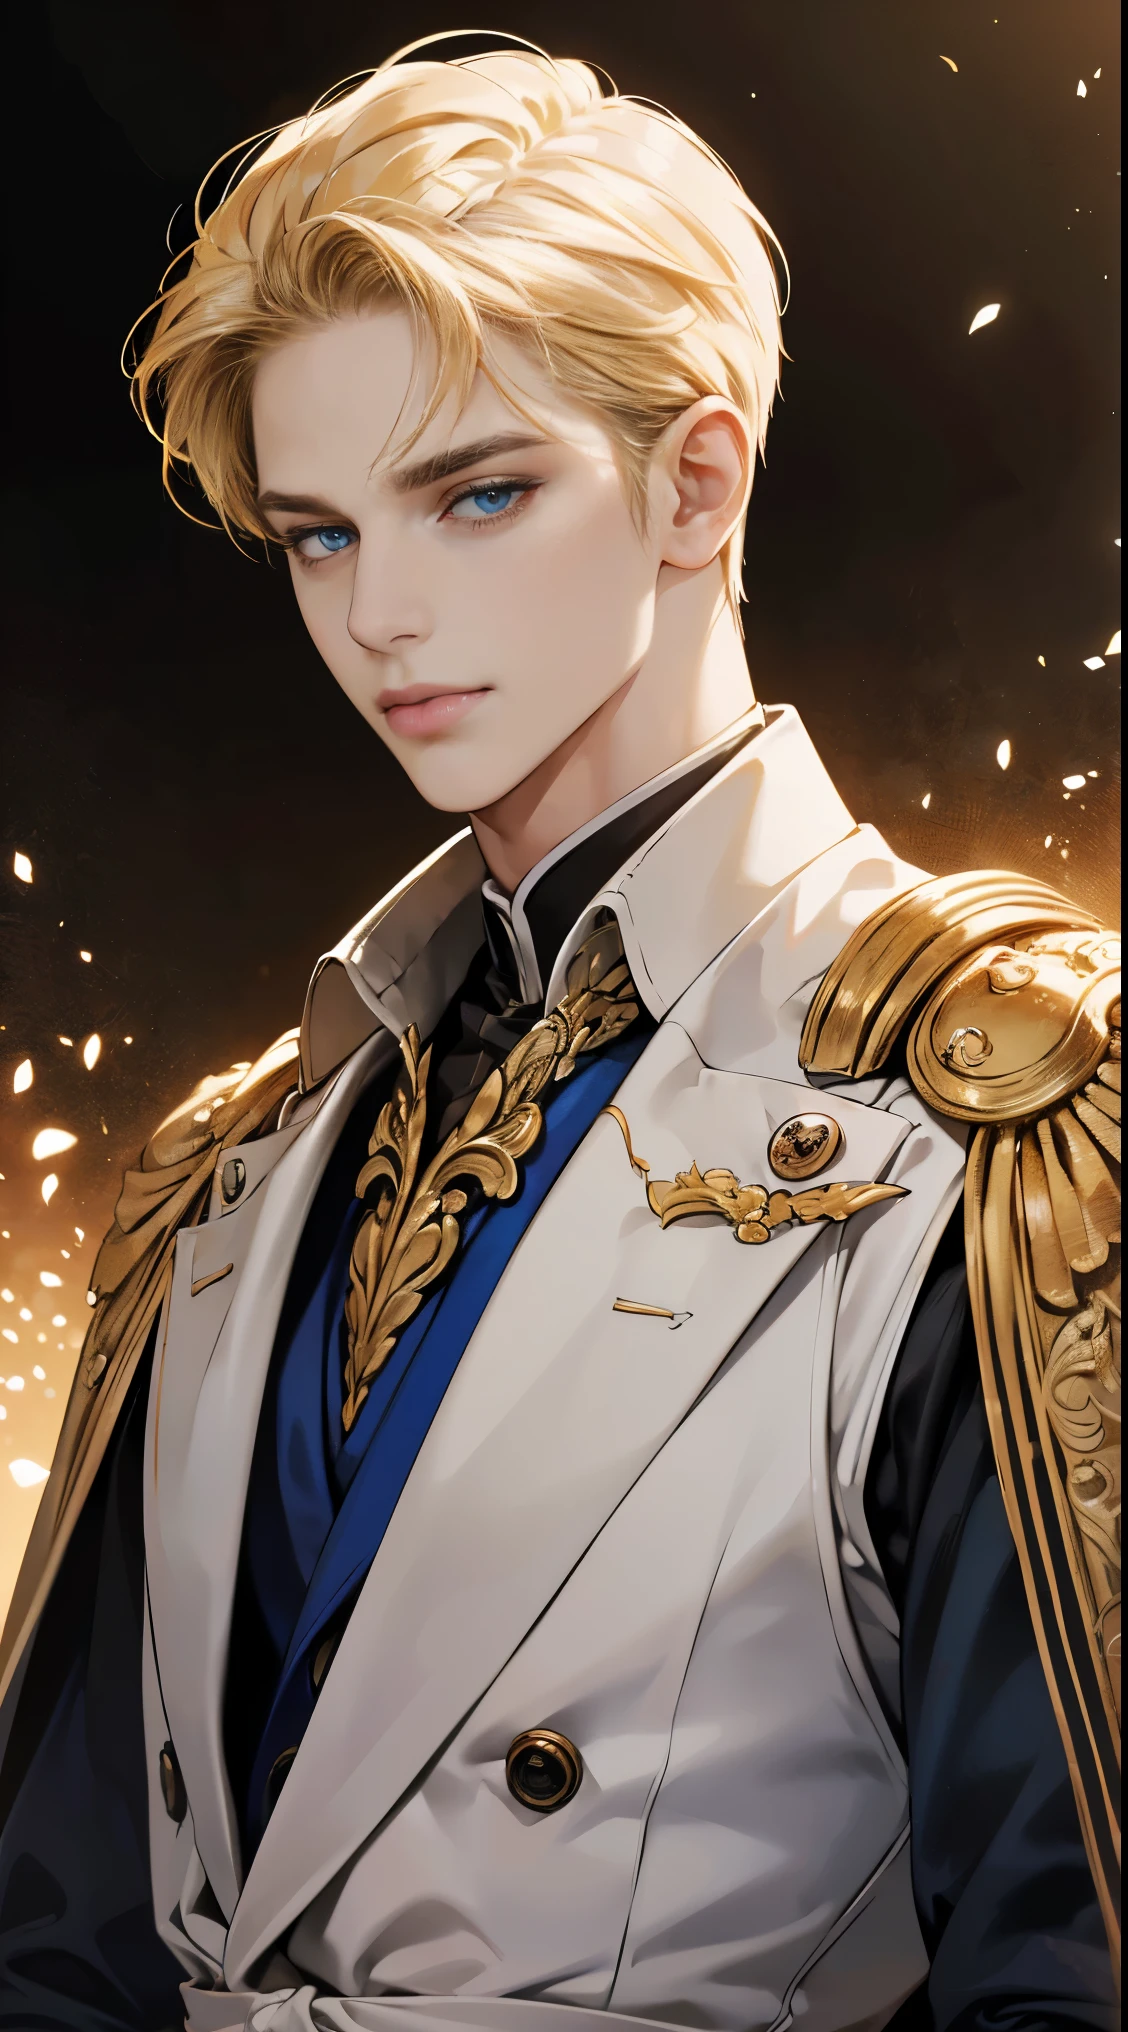 "best quality,8k,masterpiece,hdr,soft lighting,perfect image,digital illustration,comic art,photorealistic,detailed,perfect line,realistic,portrait" handsome man, blond hair with golden shine, deep blue eyes, sophisticated clothing (prince, confident posture, gentle smile), (golden shimmering black background, blurred)